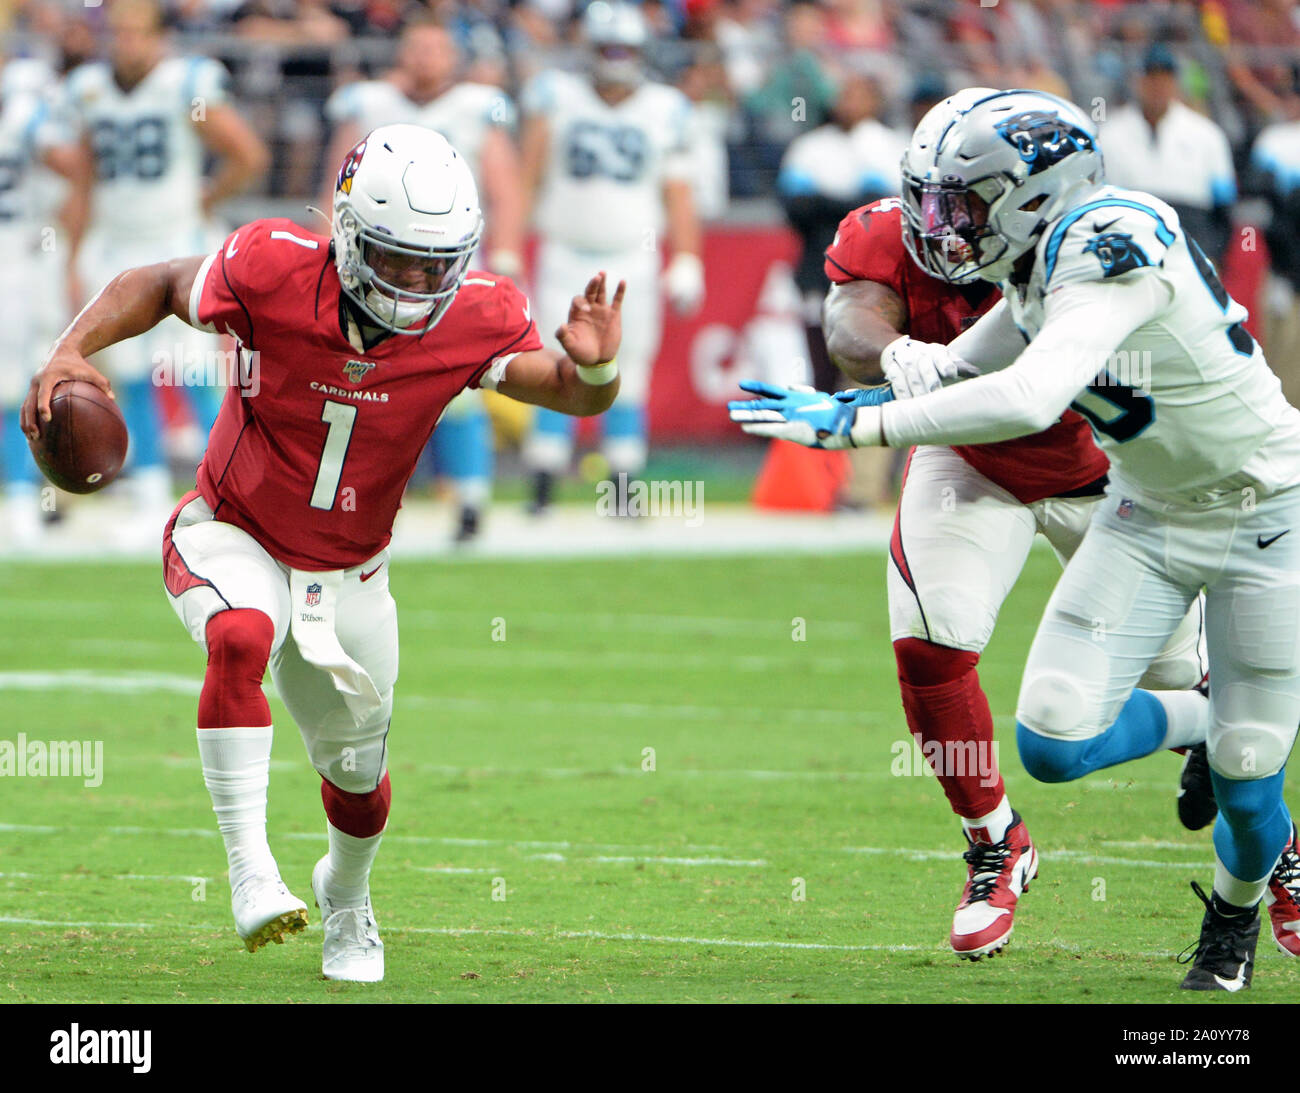 Arizona Cardinals' quarterback Kyler Murray (L) tries to dodge a tackle by Carolina Panthers' Marquis Haynes in the second quarter at State Farm Stadium in Glendale, Arizona on Sunday, September 22, 2019. Photo by Art Foxall/UPI Stock Photo